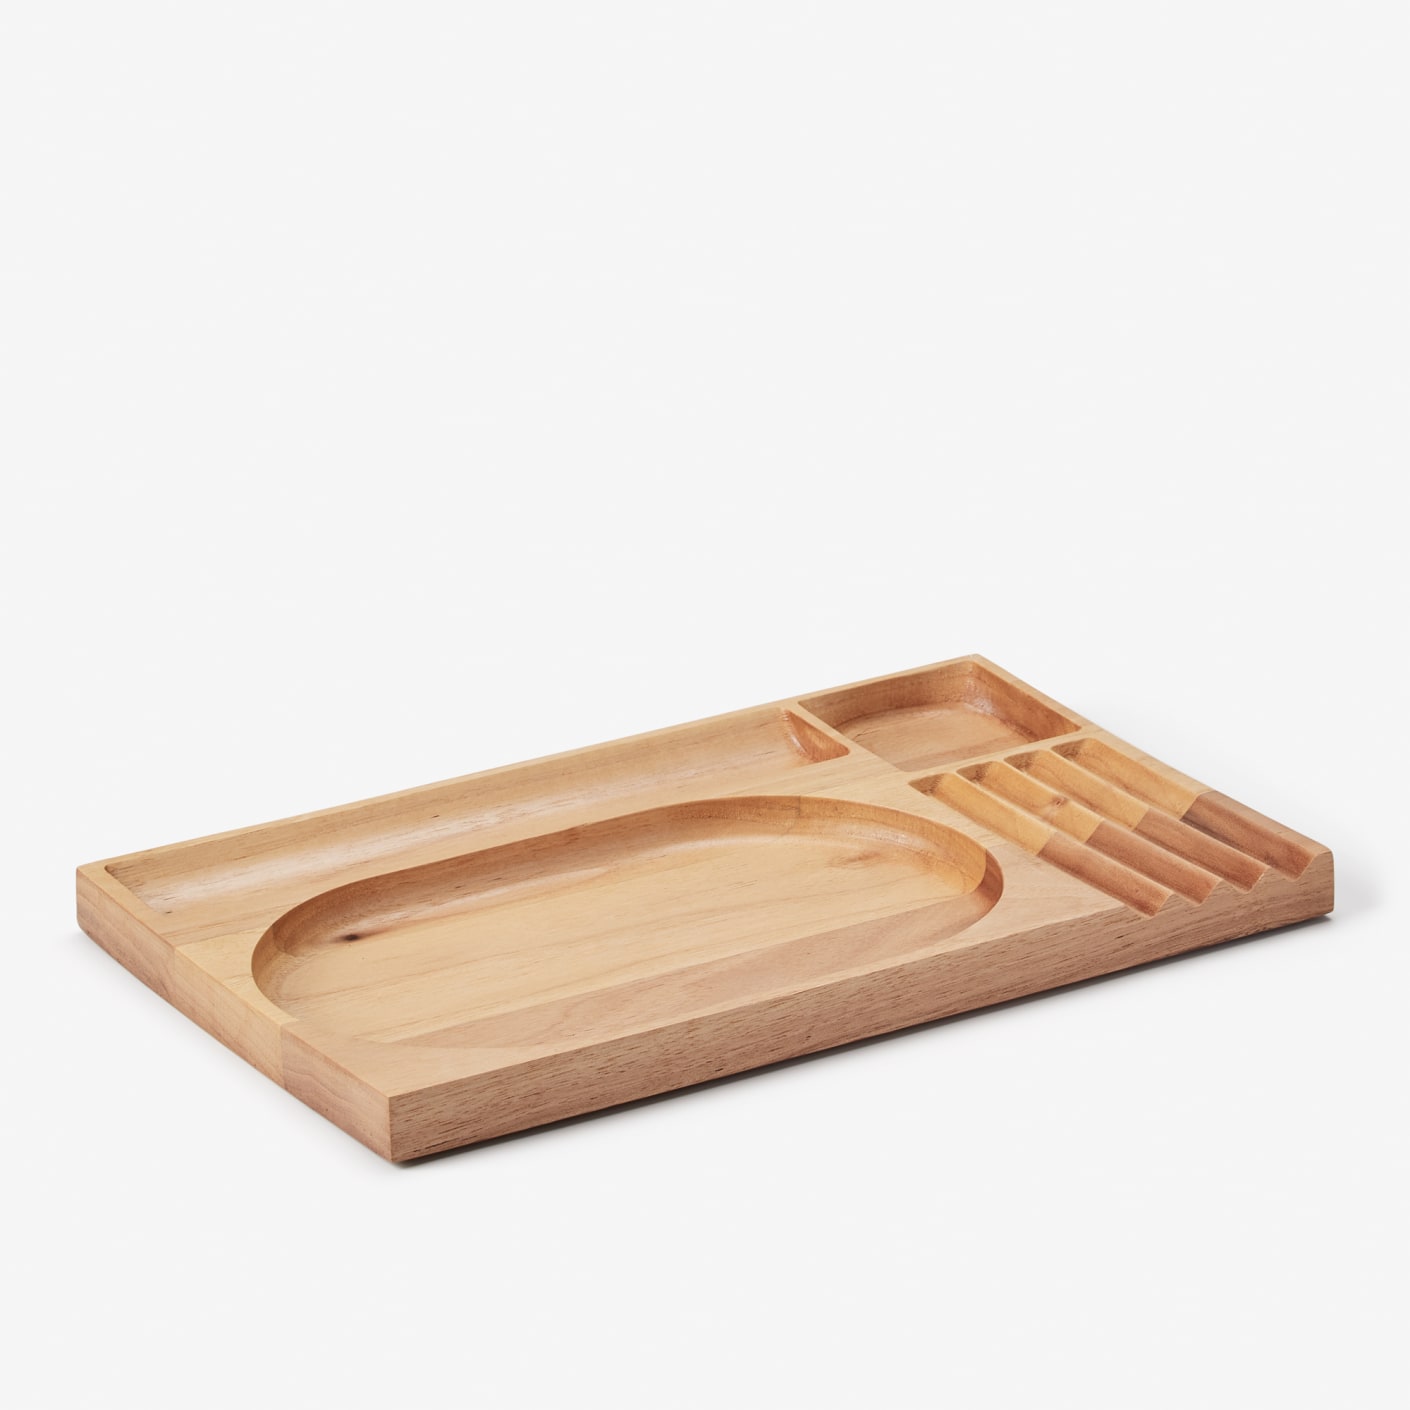 Ouid Large Wooden Rolling Tray | Bespoke Post